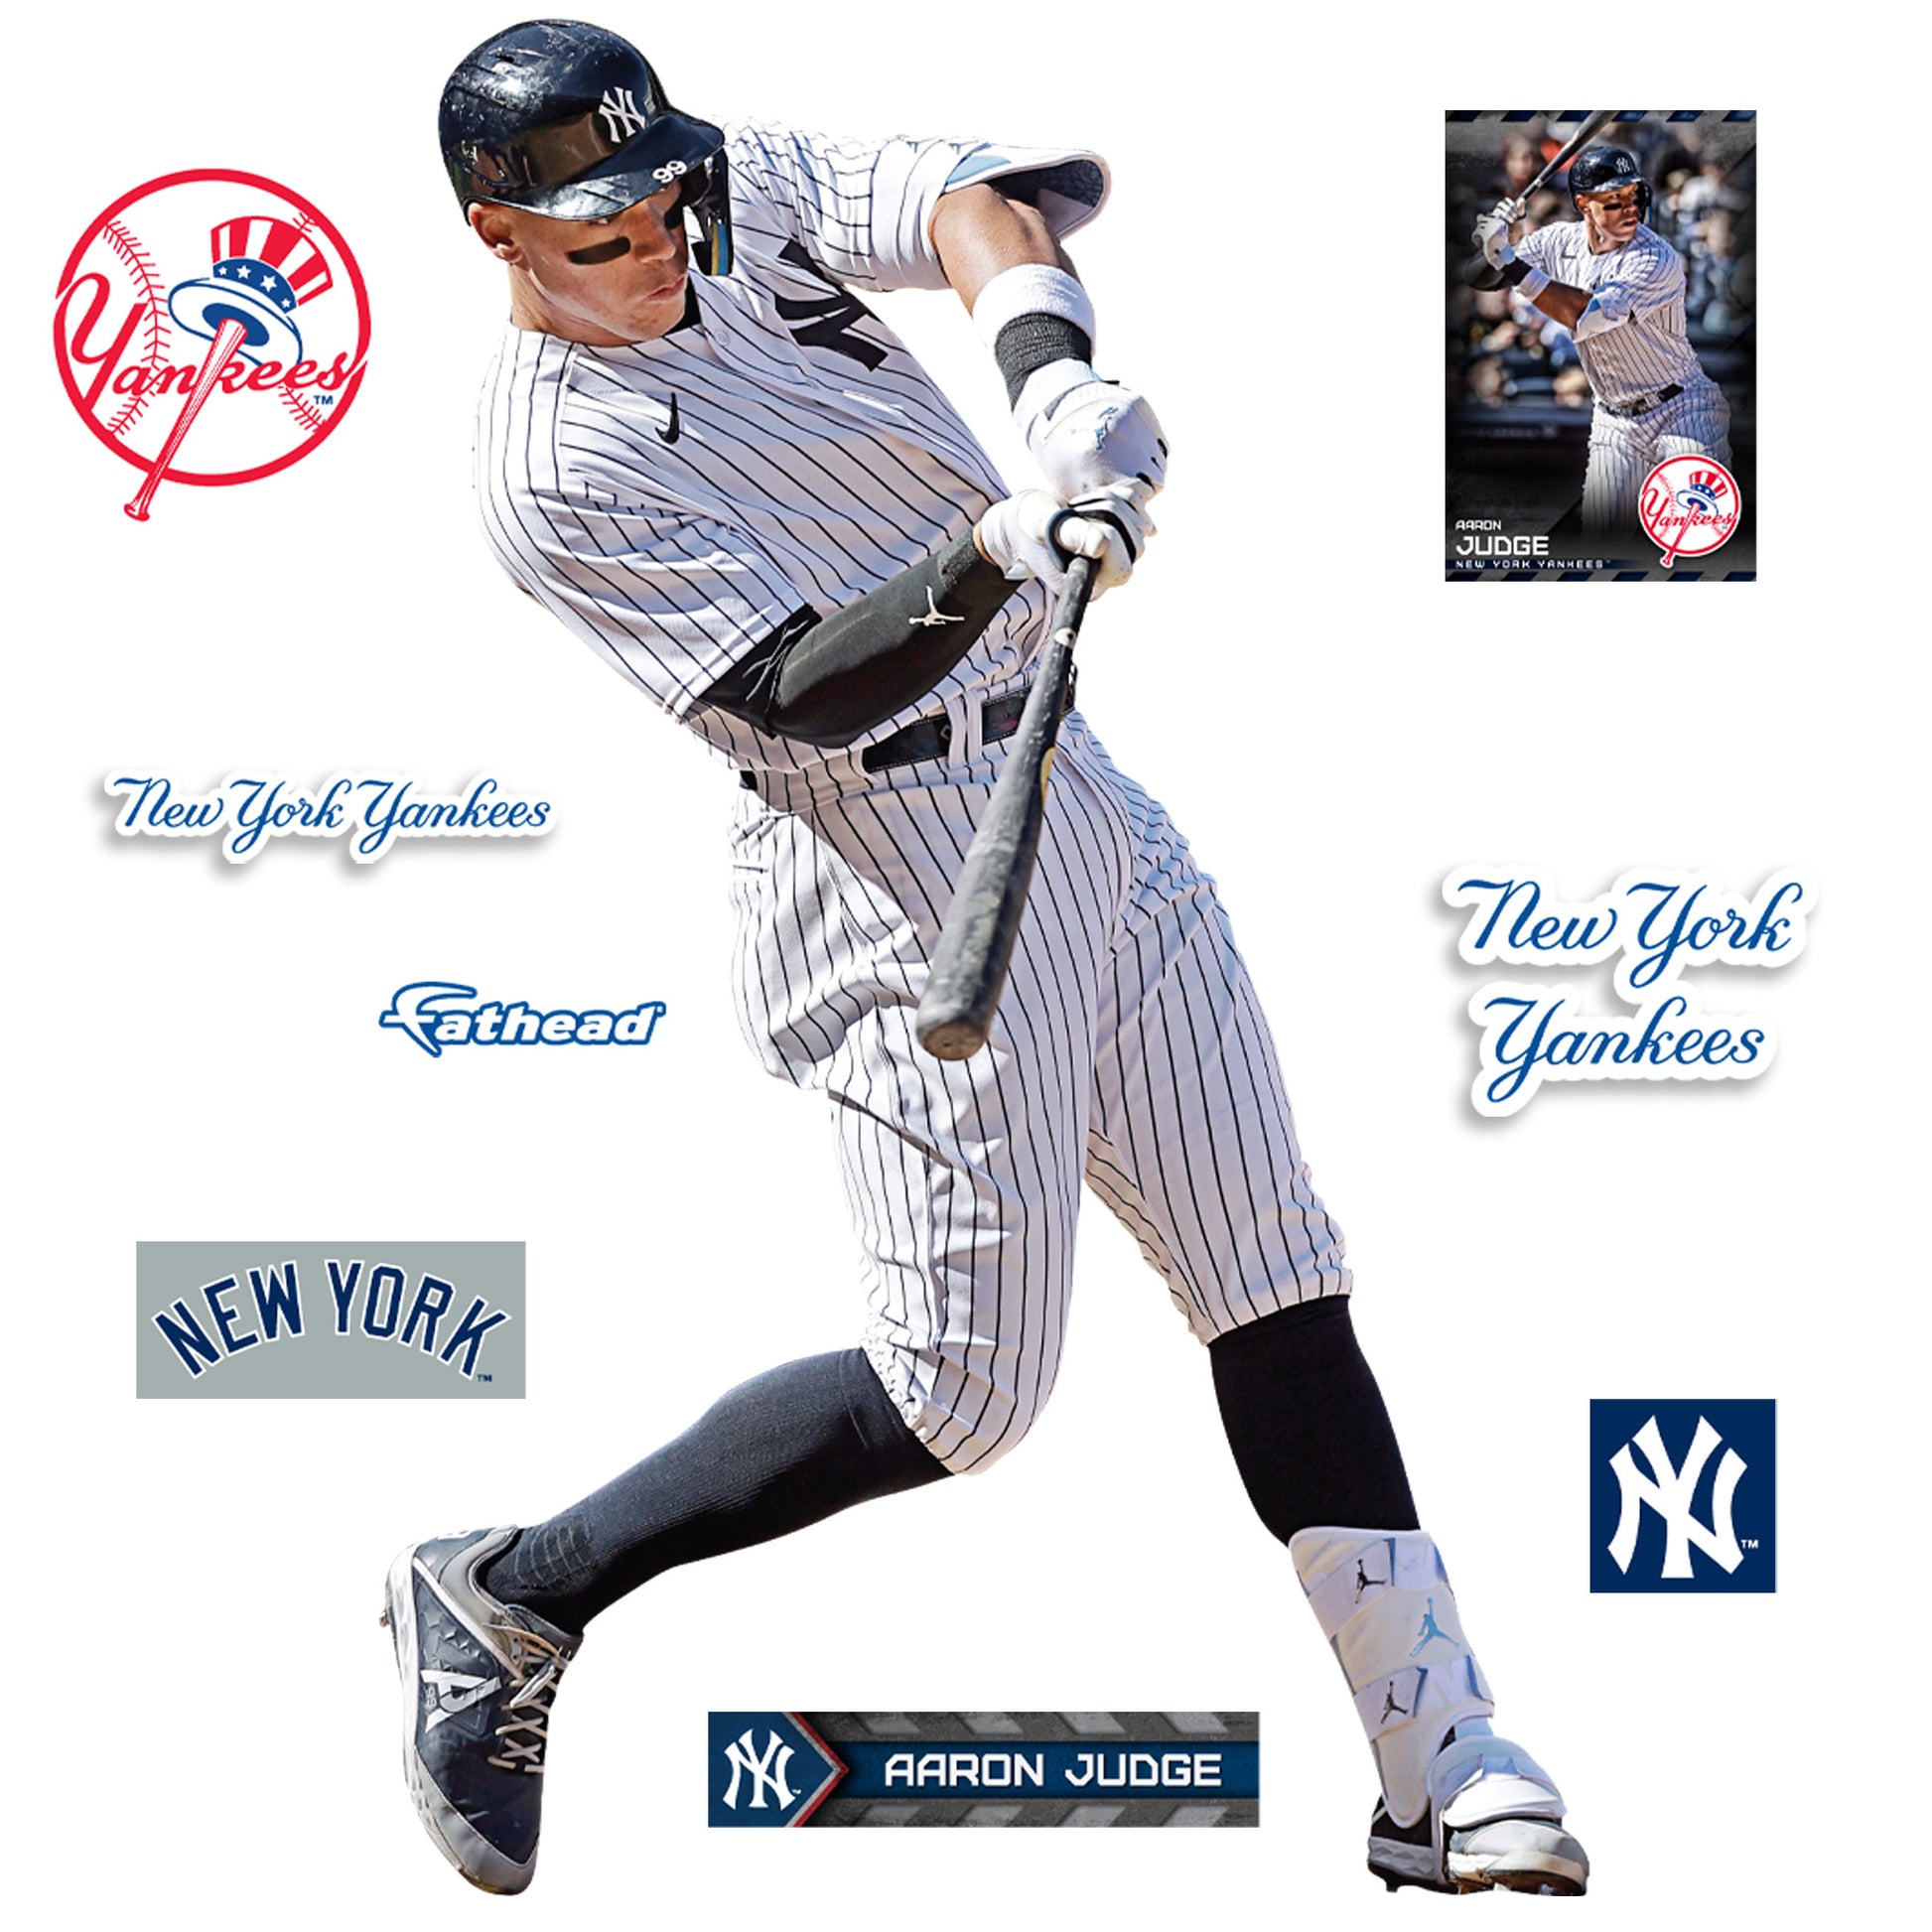 New York Yankees MLB licensed merchandise, get yours now